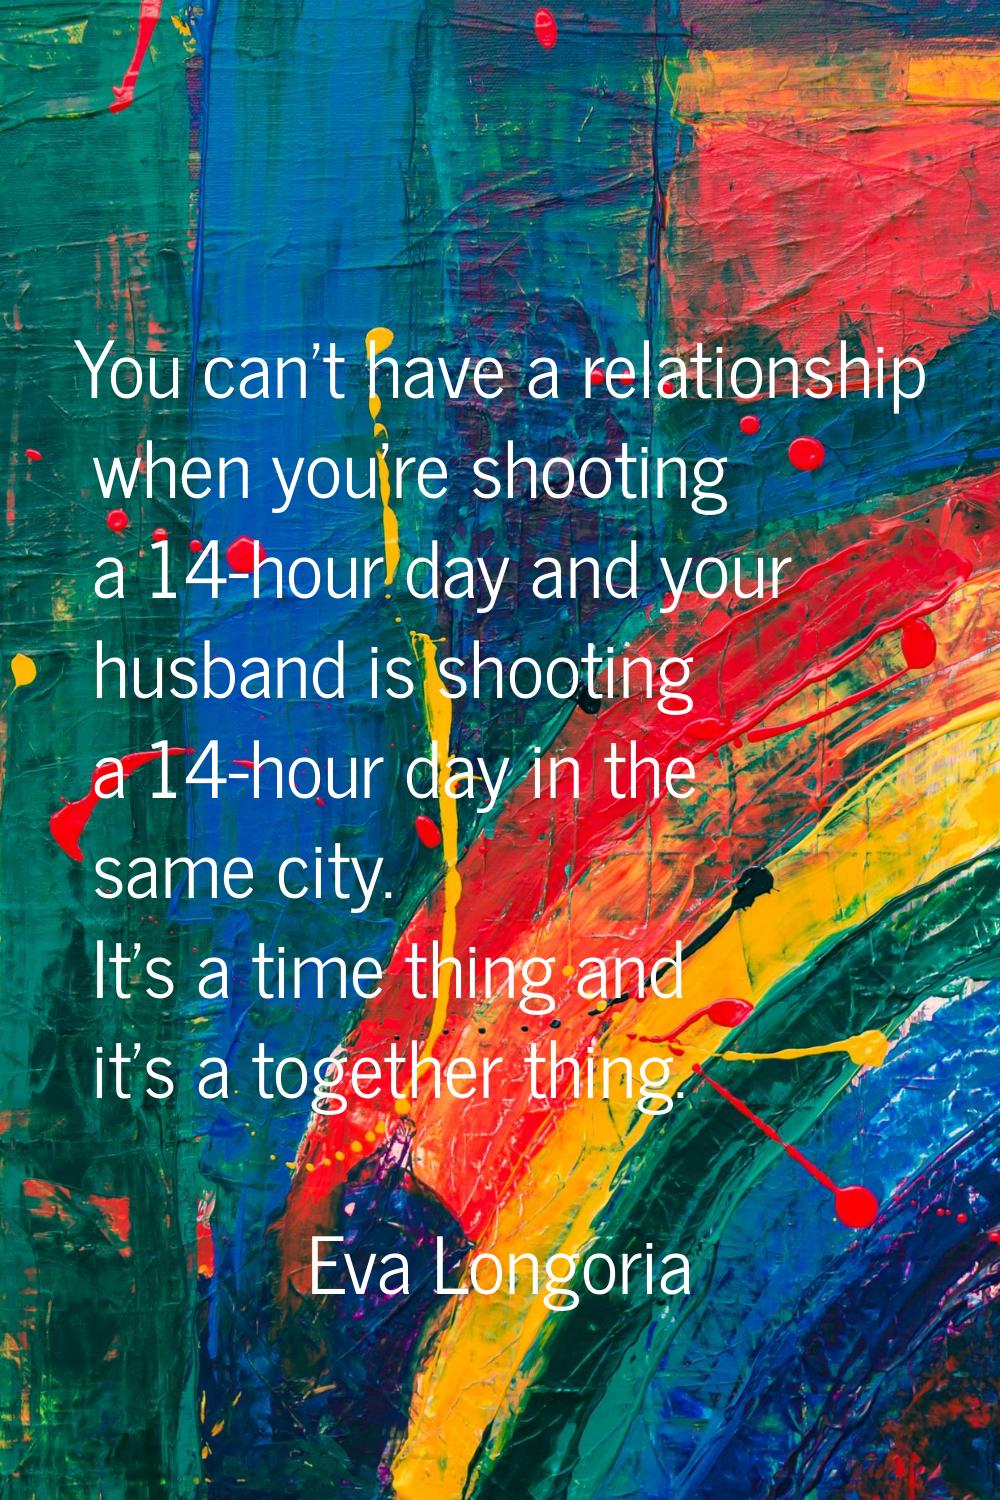 You can't have a relationship when you're shooting a 14-hour day and your husband is shooting a 14-